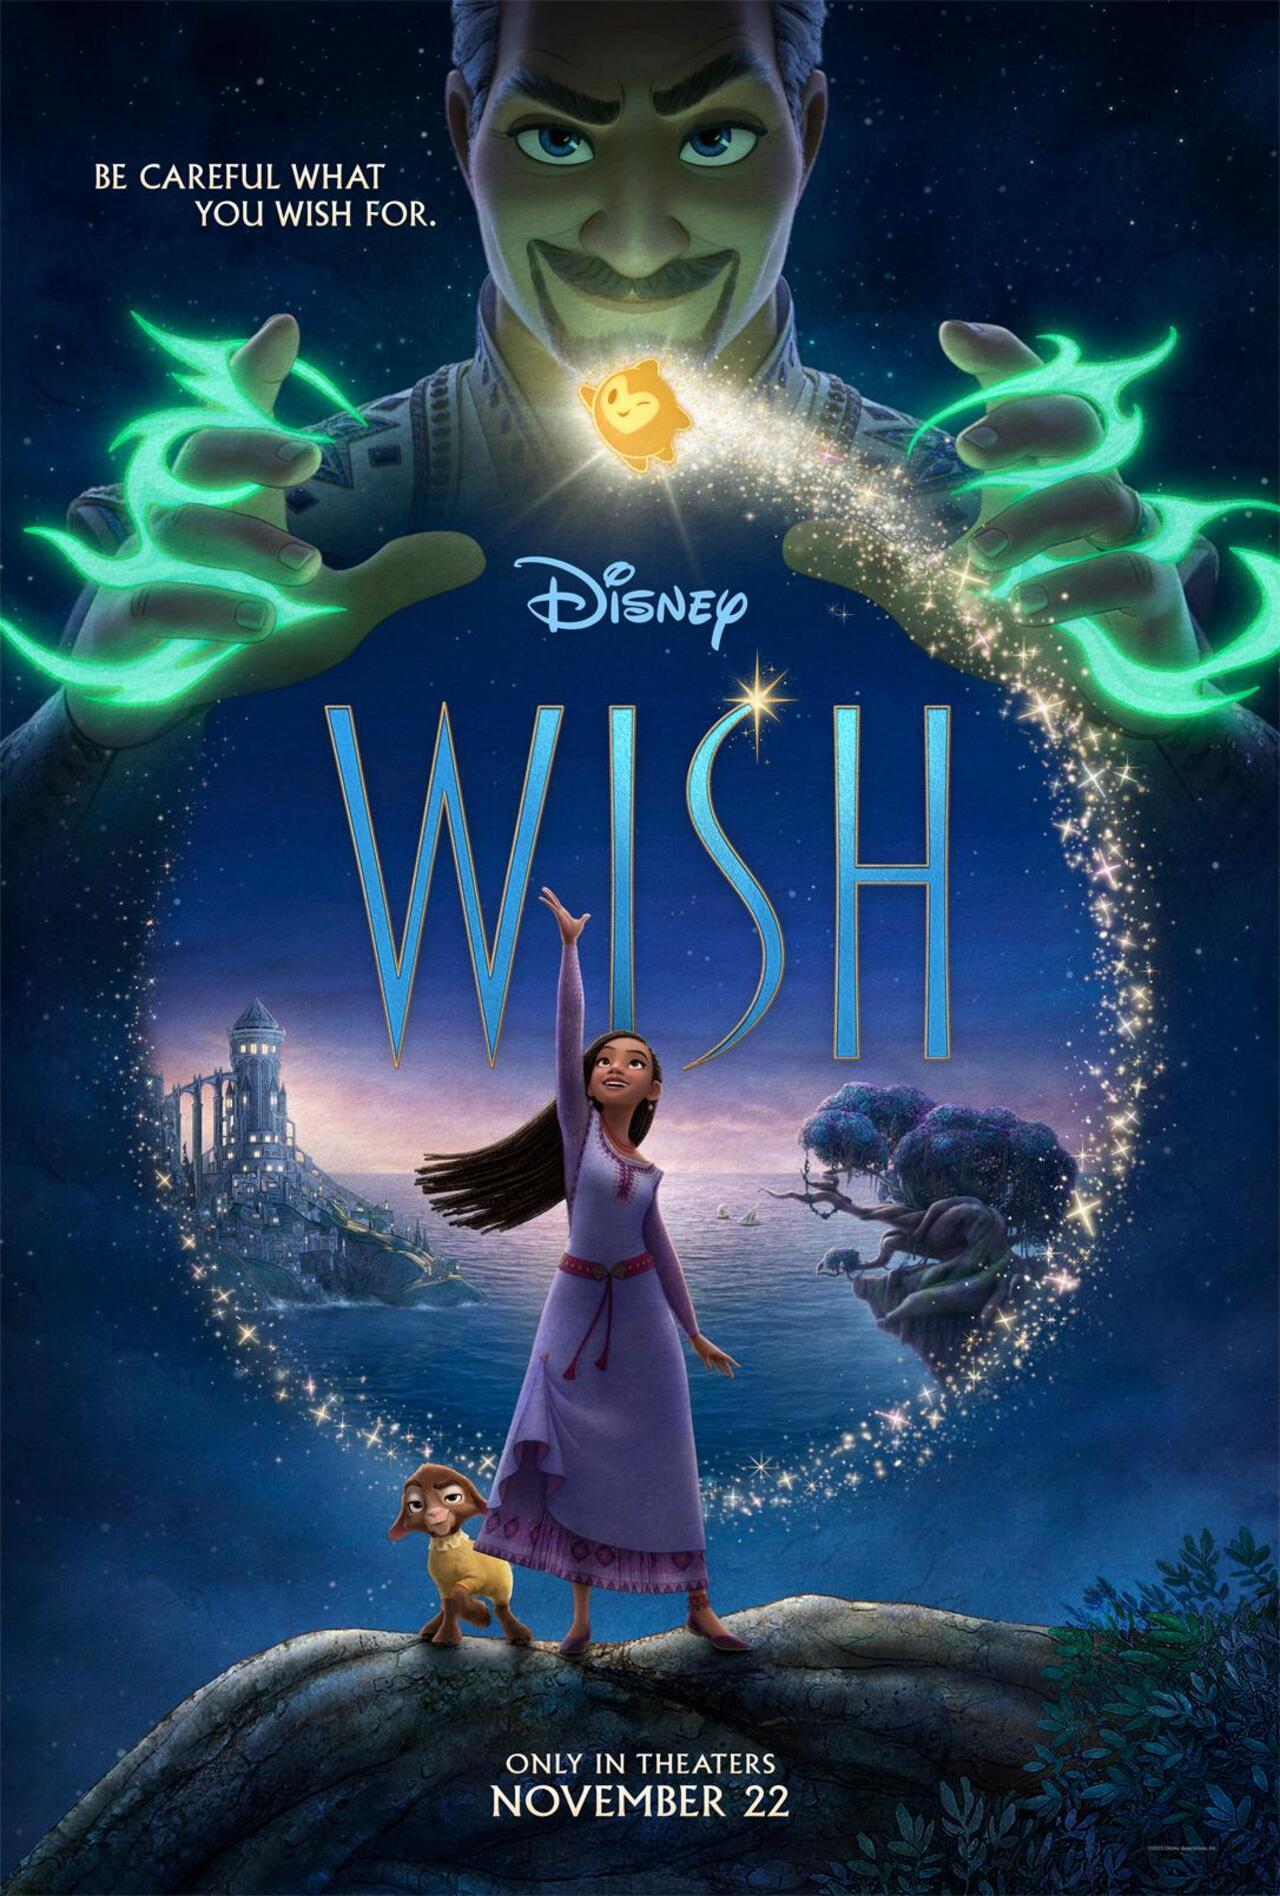 Wish is an animated musical fantasy film produced by Walt Disney Animation Studios. The much-awaited film is scheduled to release on November 24, 2023